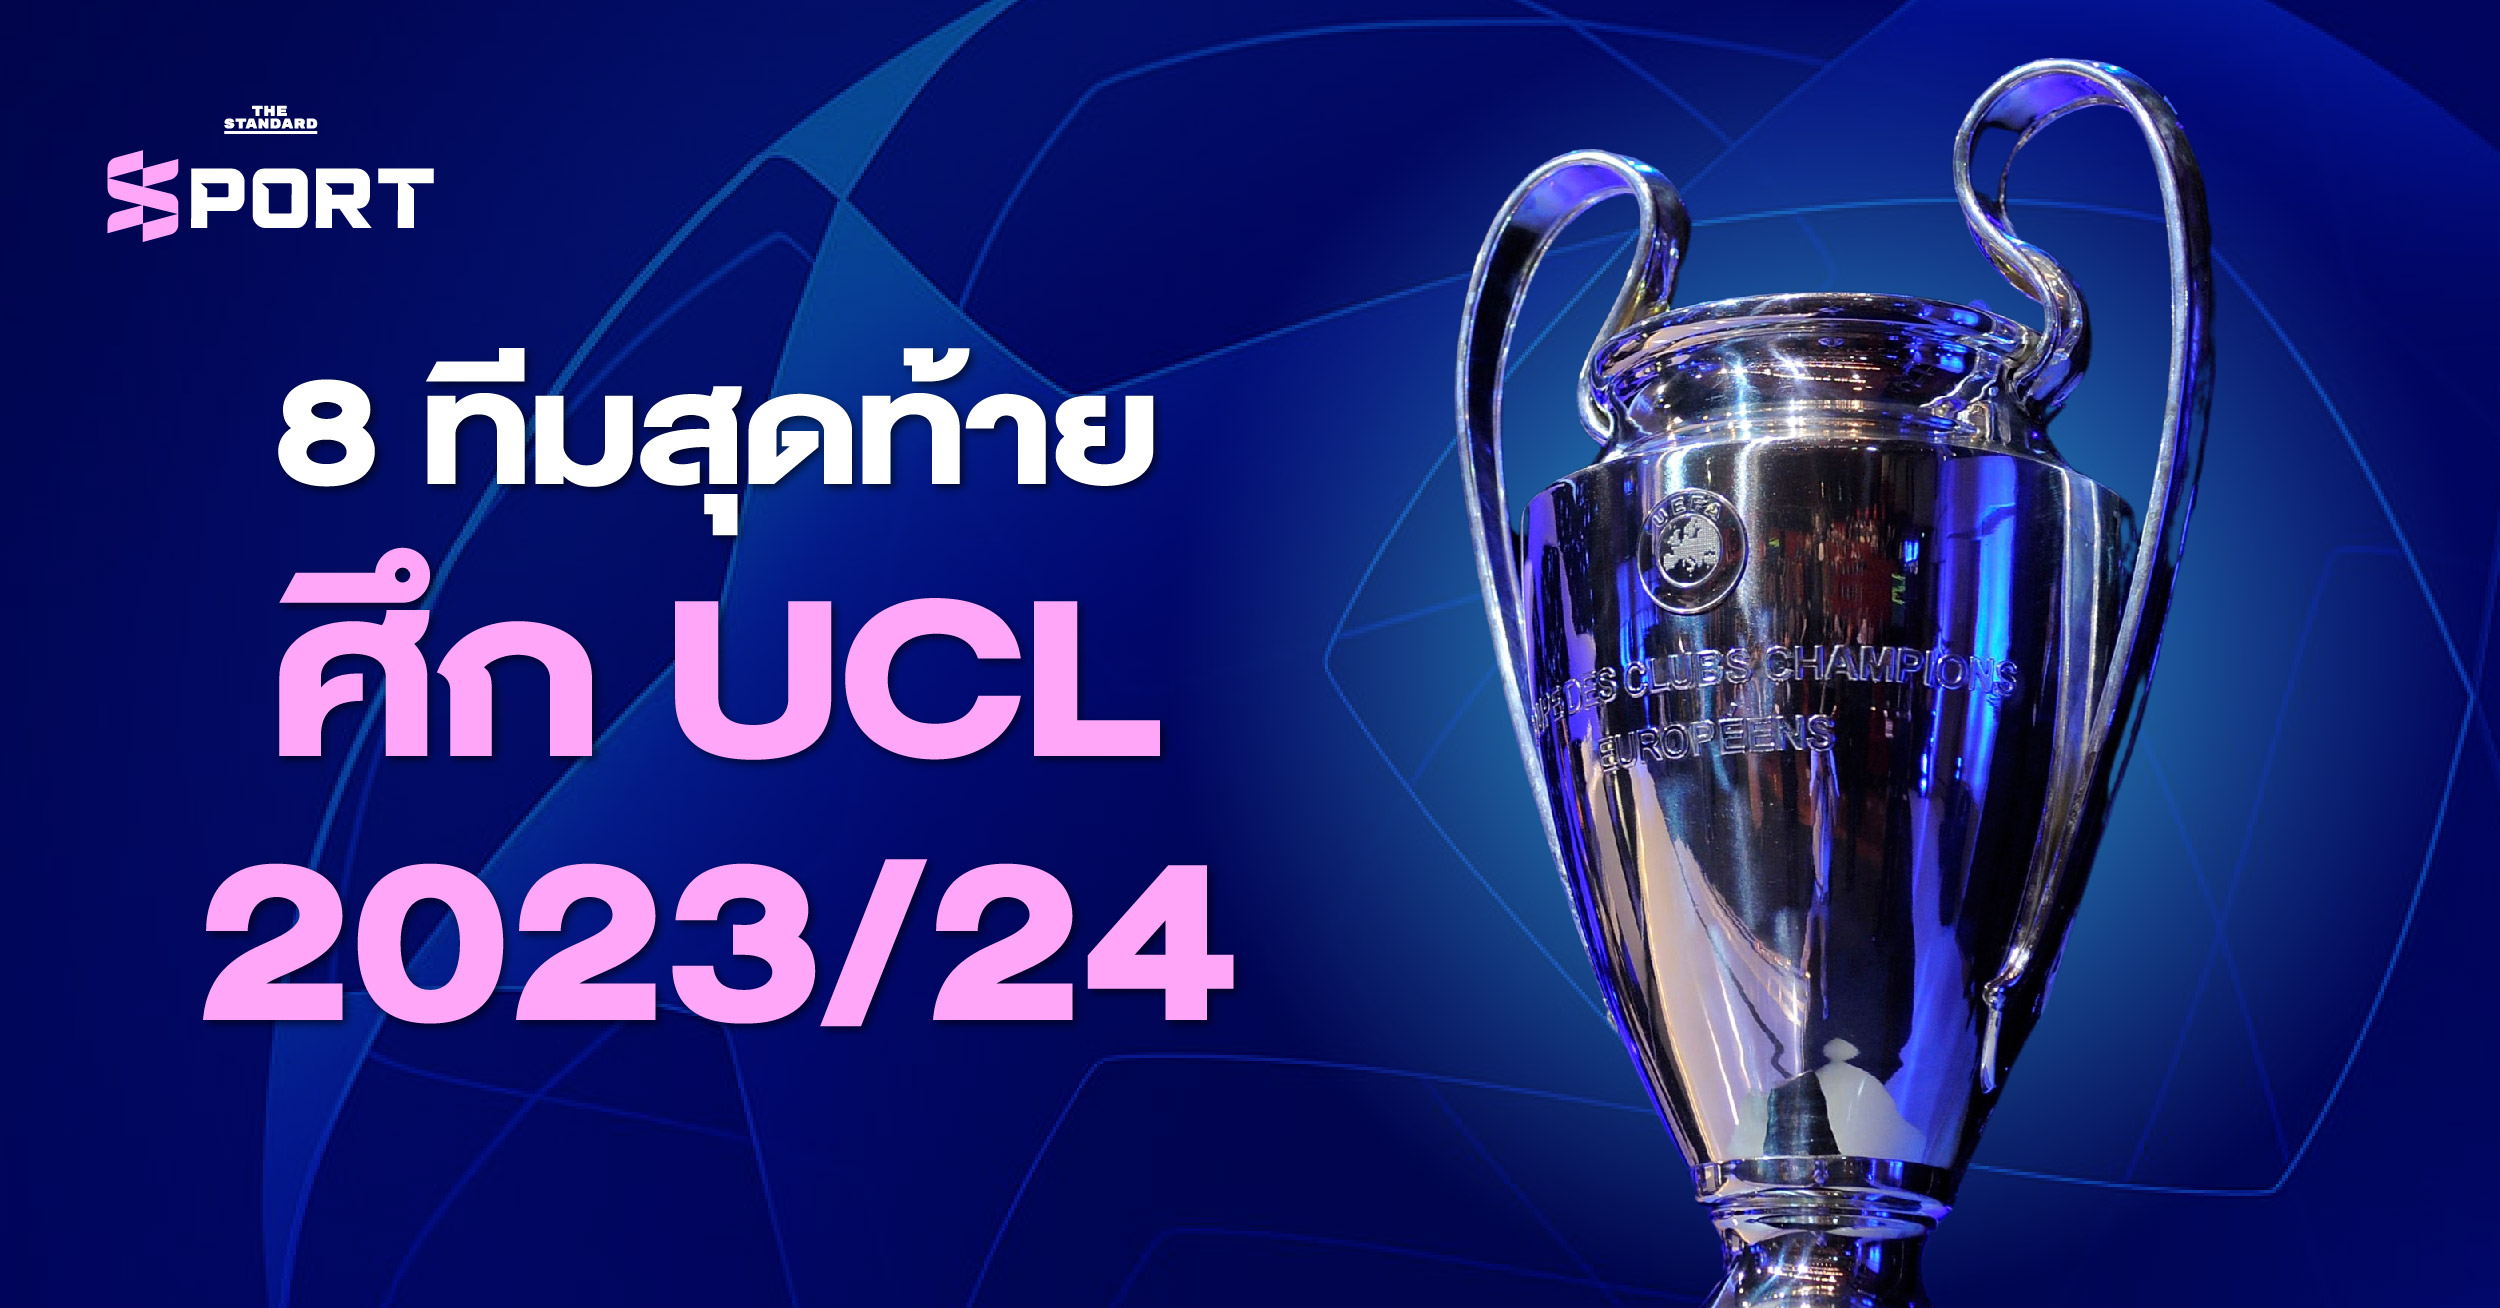 UCL 2023/24